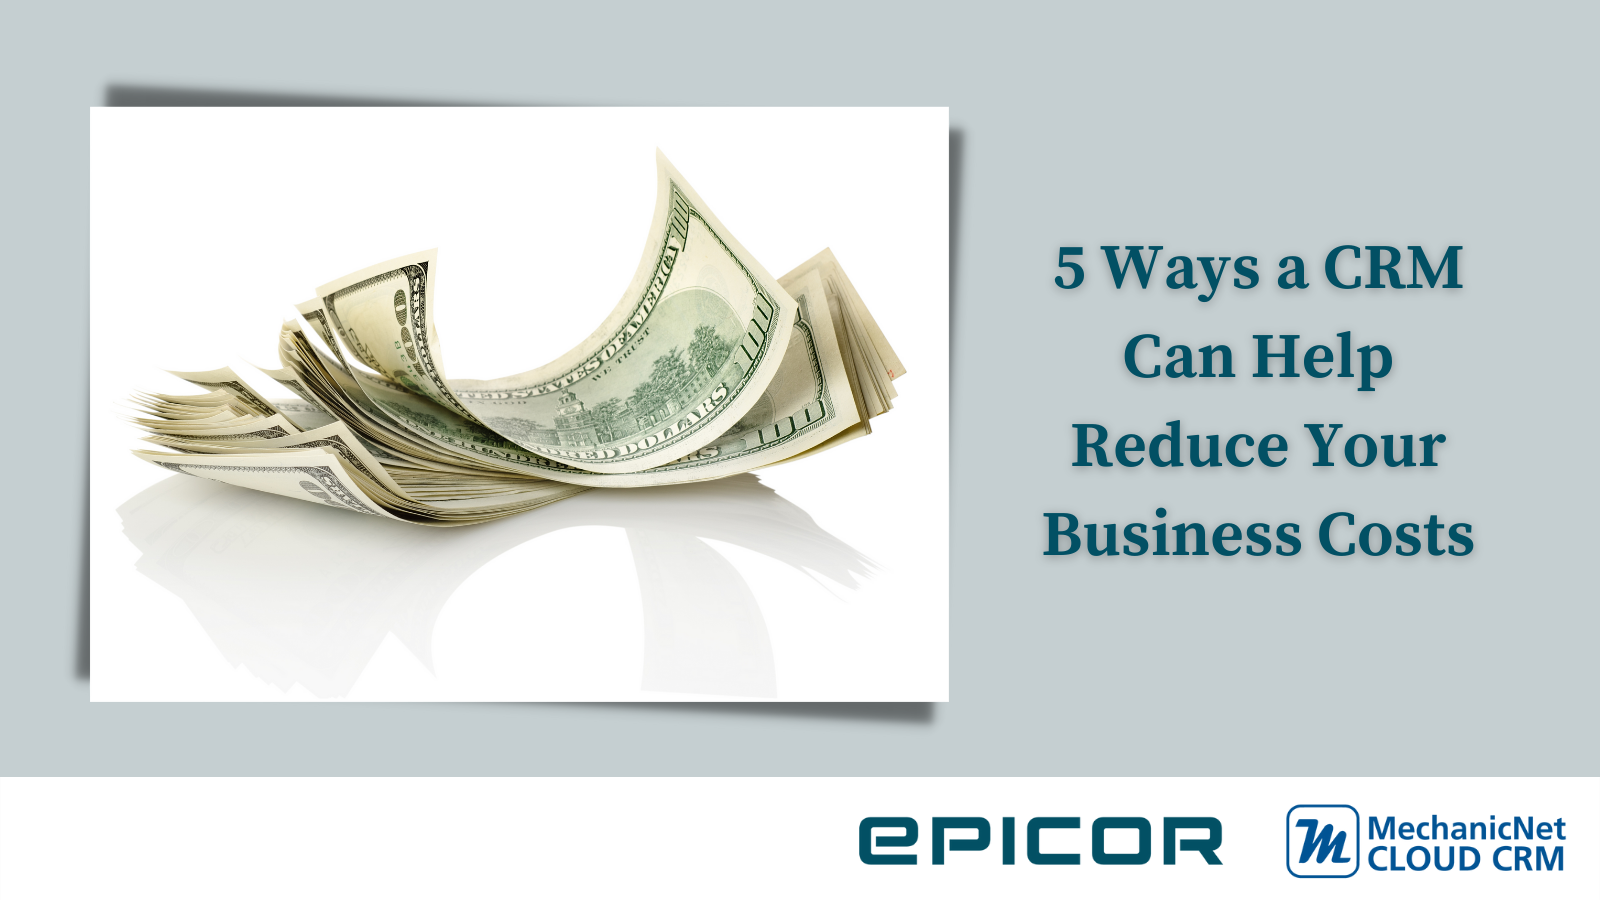 money image: 5 ways a CRM can help reduce your business costs